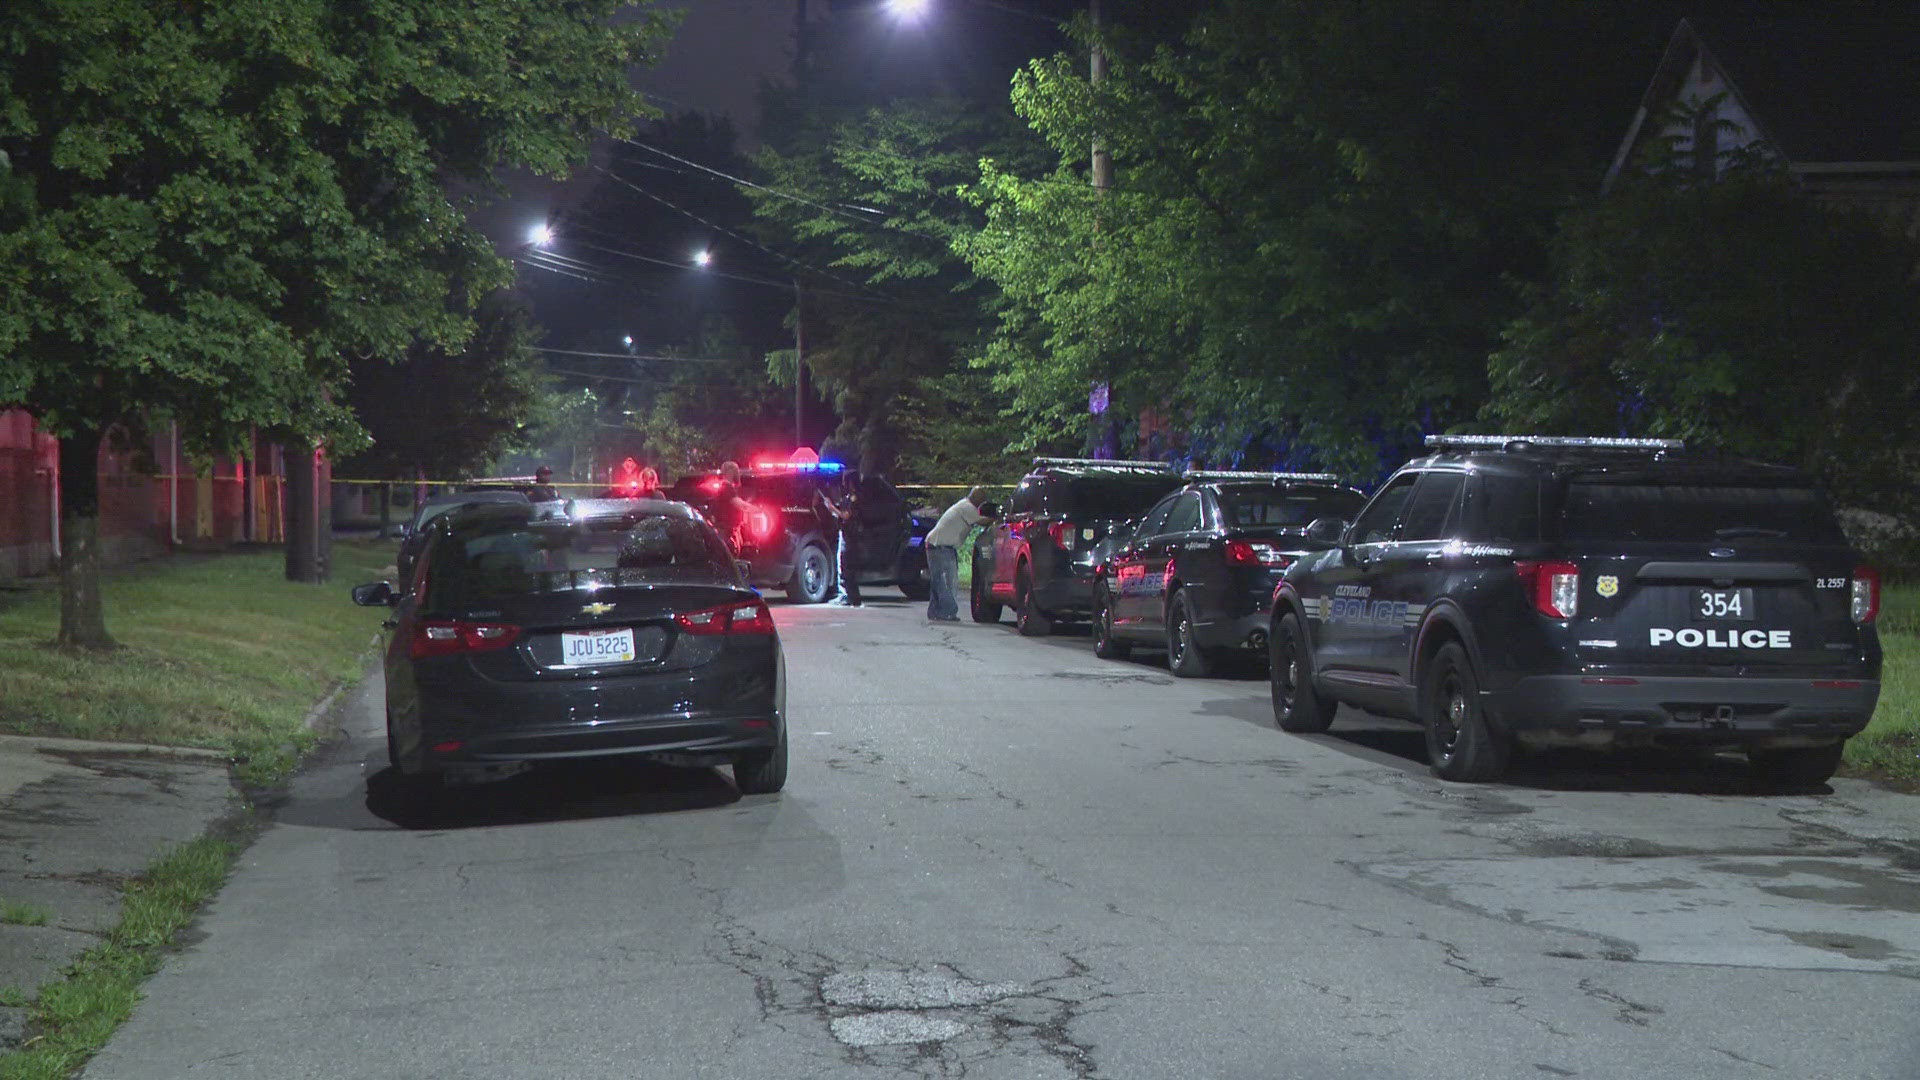 One person has died after an overnight shooting on Morgan Avenue in Cleveland.